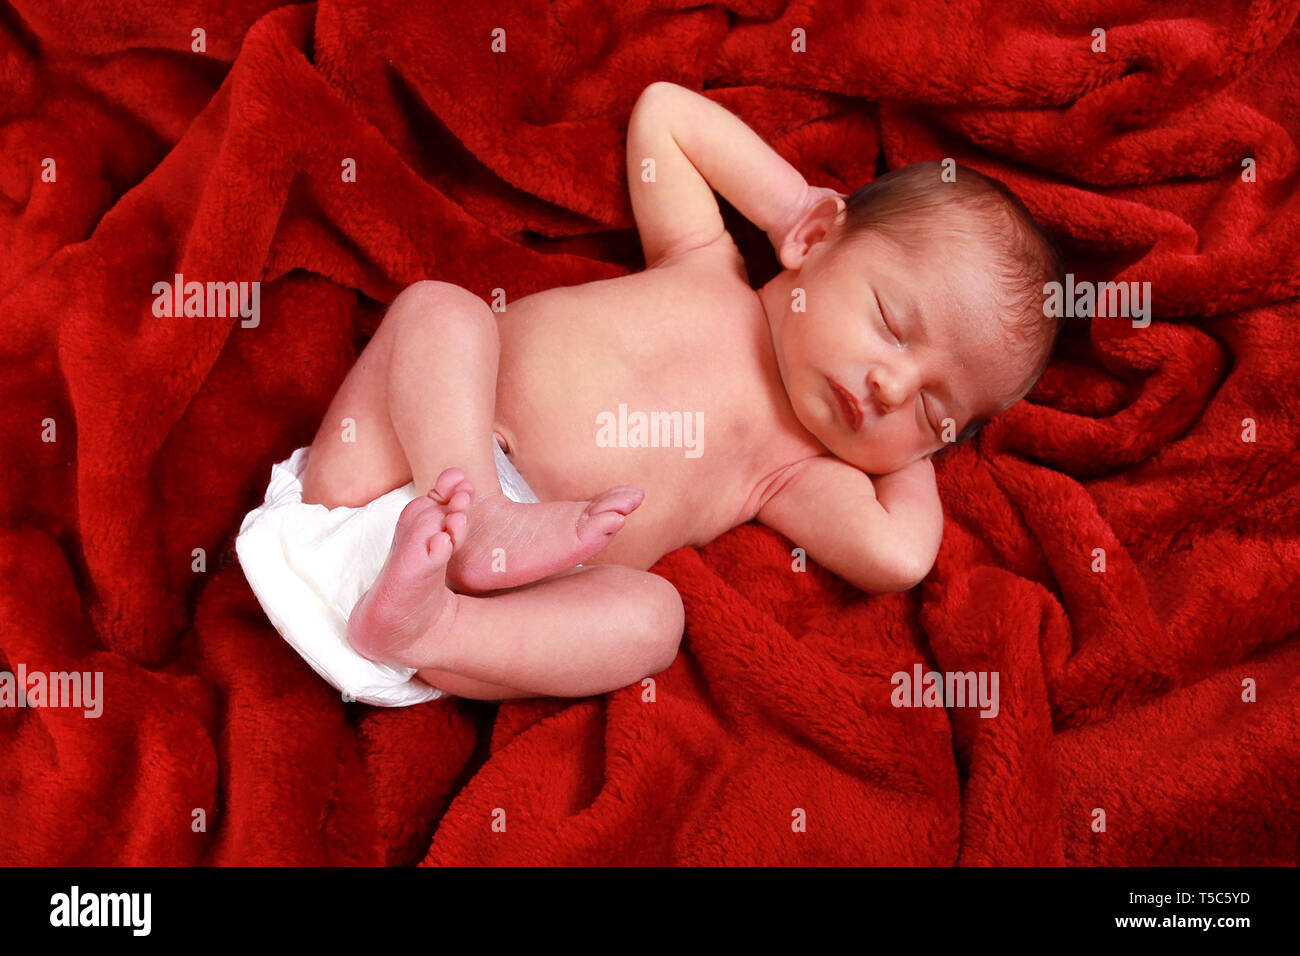 New Born Baby Boy Banque D'Images